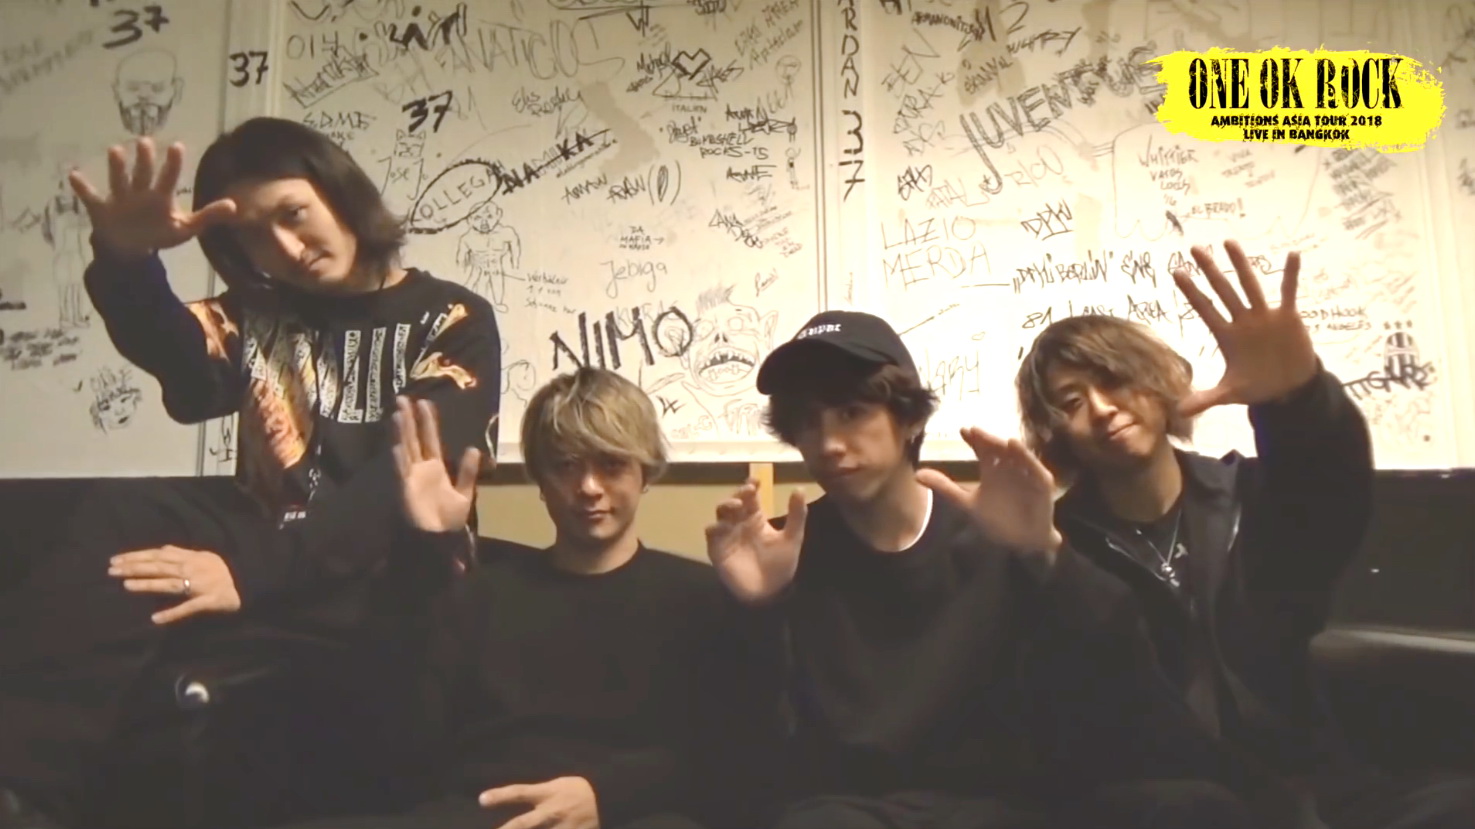 Video Message – ONE OK ROCK AMBITIONS ASIA TOUR 2018 Live in Bangkok by Avalon Live (4)